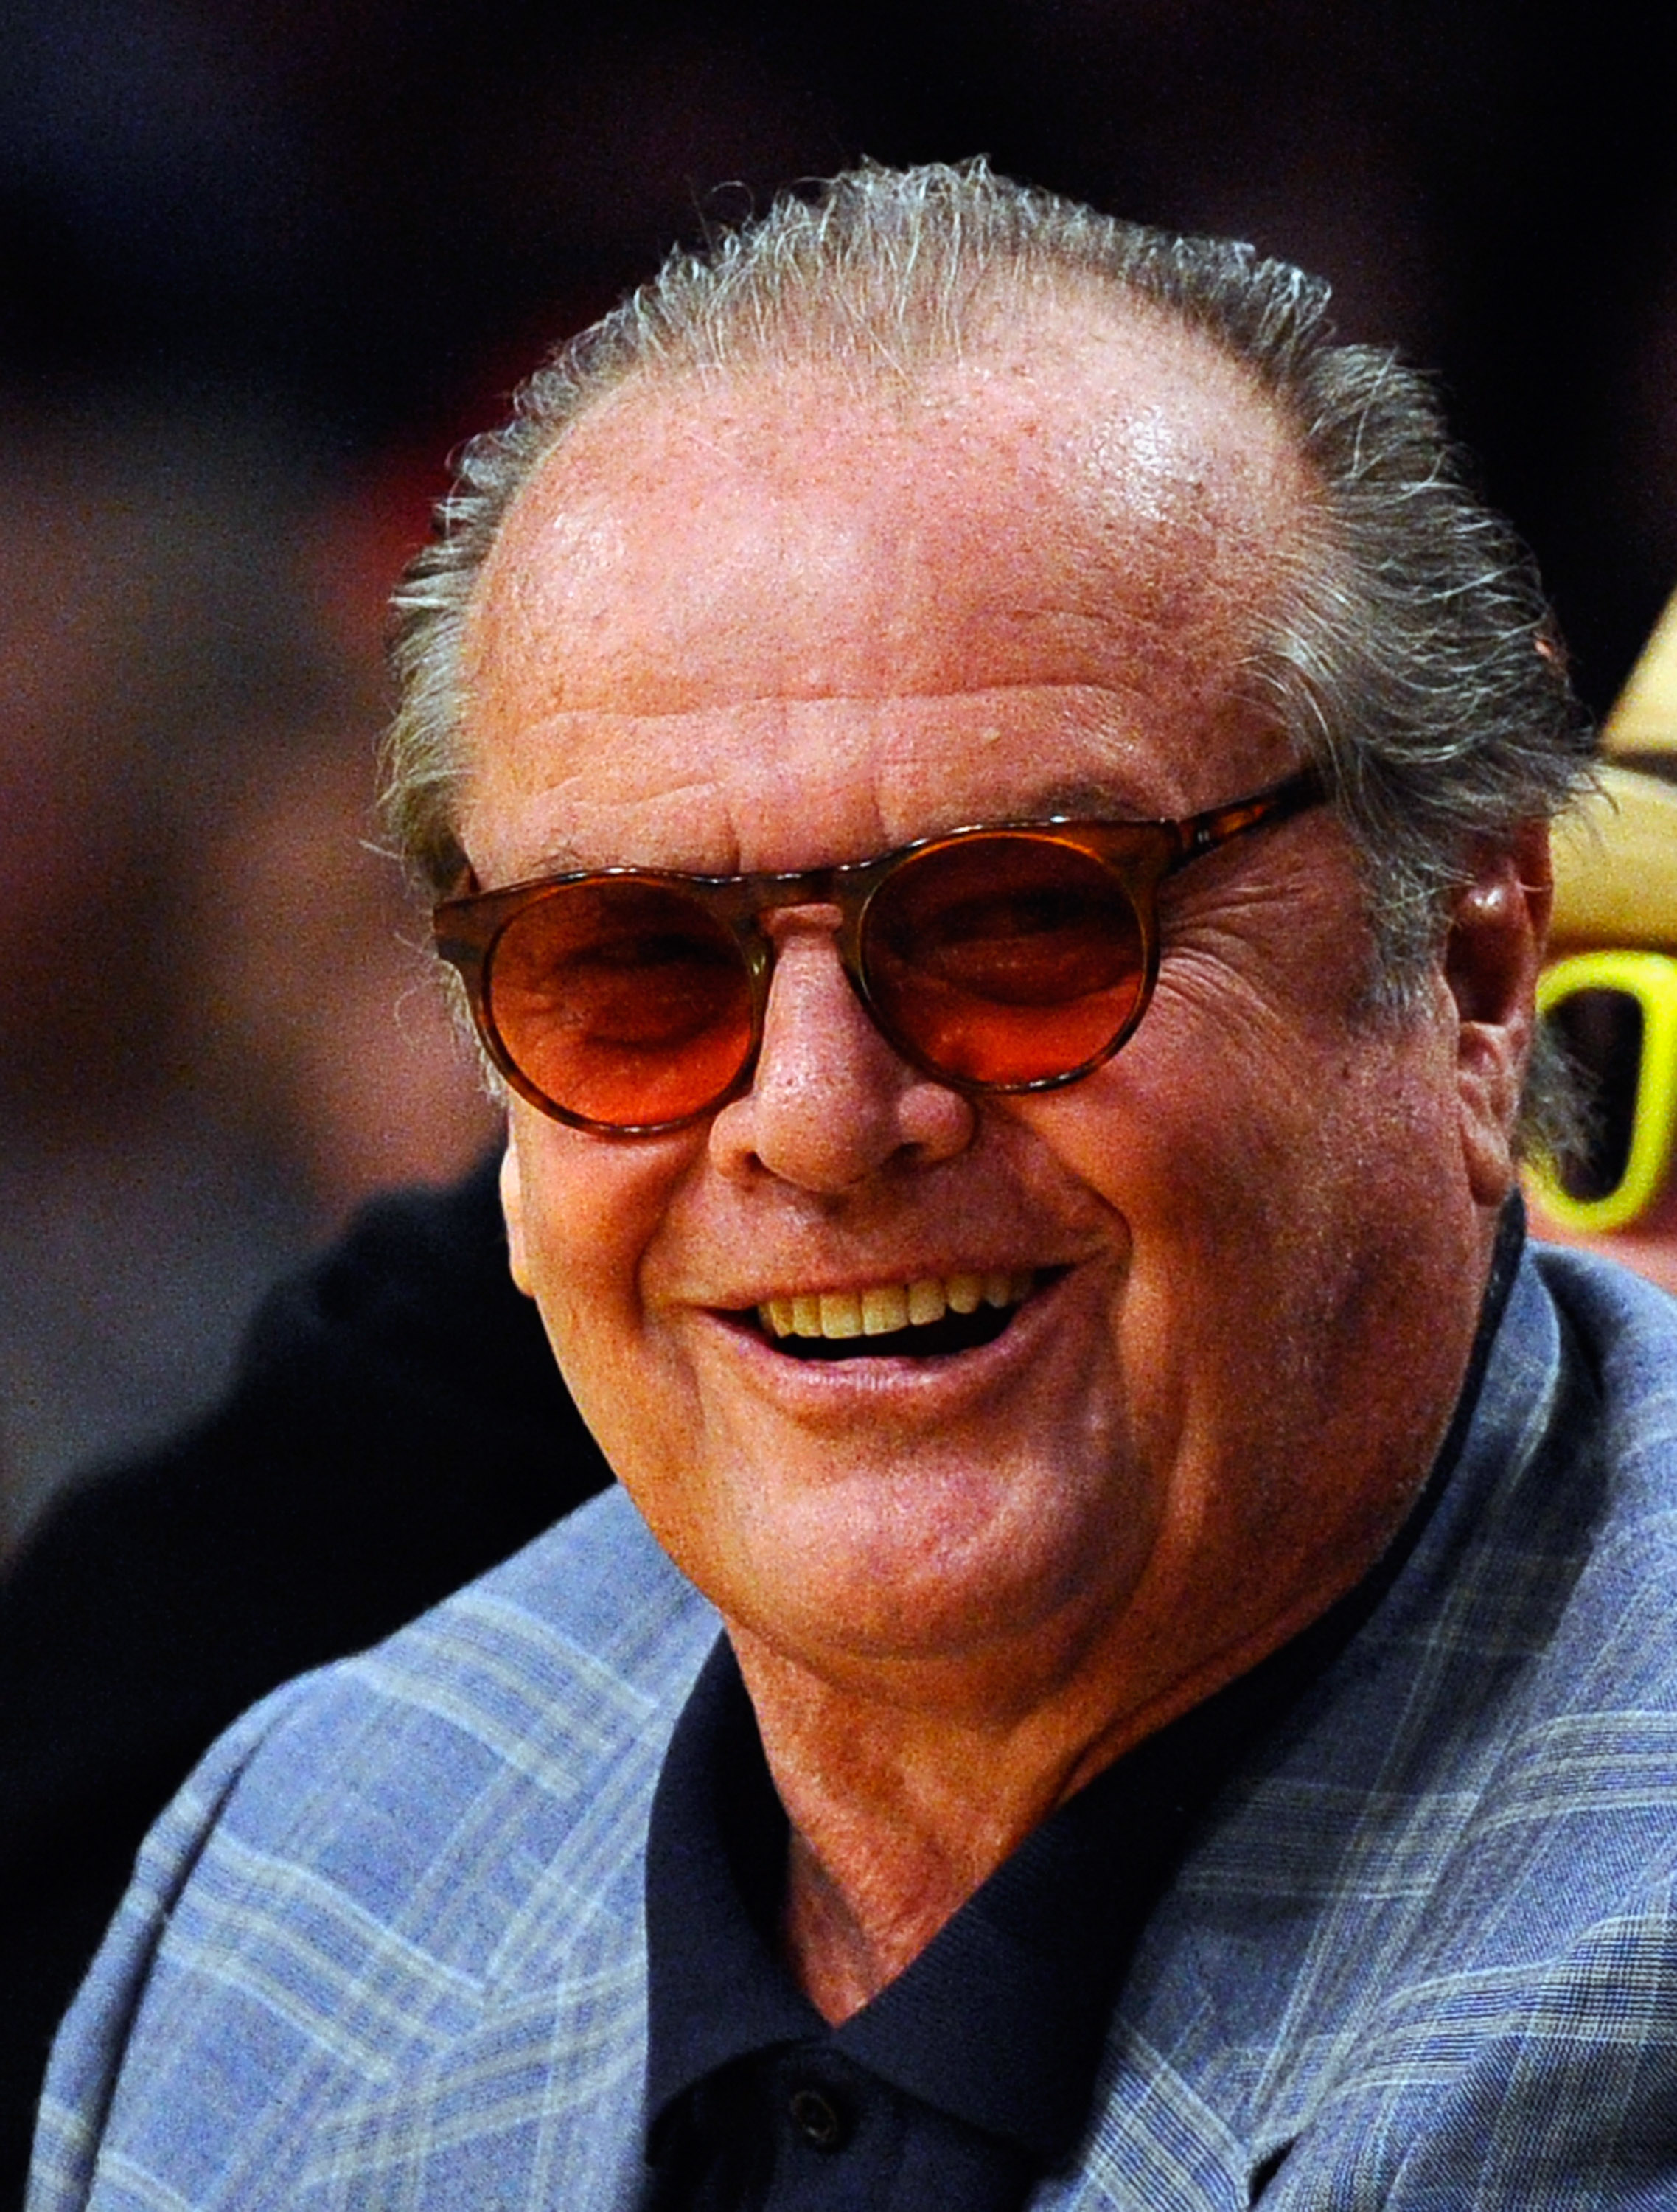 LOS ANGELES, CA - APRIL 03:  Jack Nicholson attends the Denver Nuggets and Los Angeles Lakers basketball game at Staples Center on April 3, 2011 in Los Angeles, California.  NOTE TO USER: User expressly acknowledges and agrees that, by downloading and/or